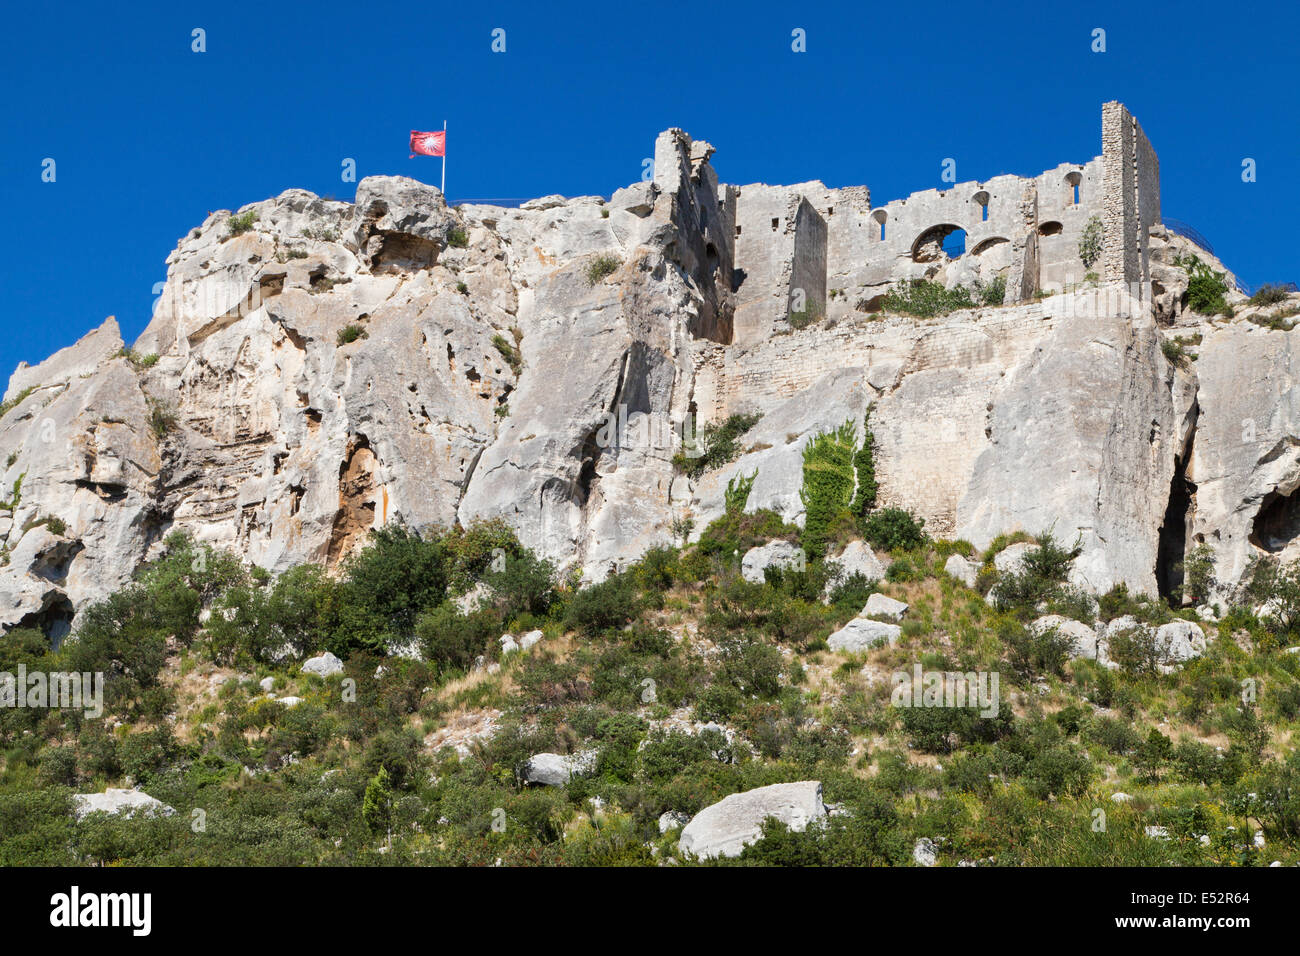 Ruins of the destroyed fortress of Les Baux de Provence, France. Stock Photo